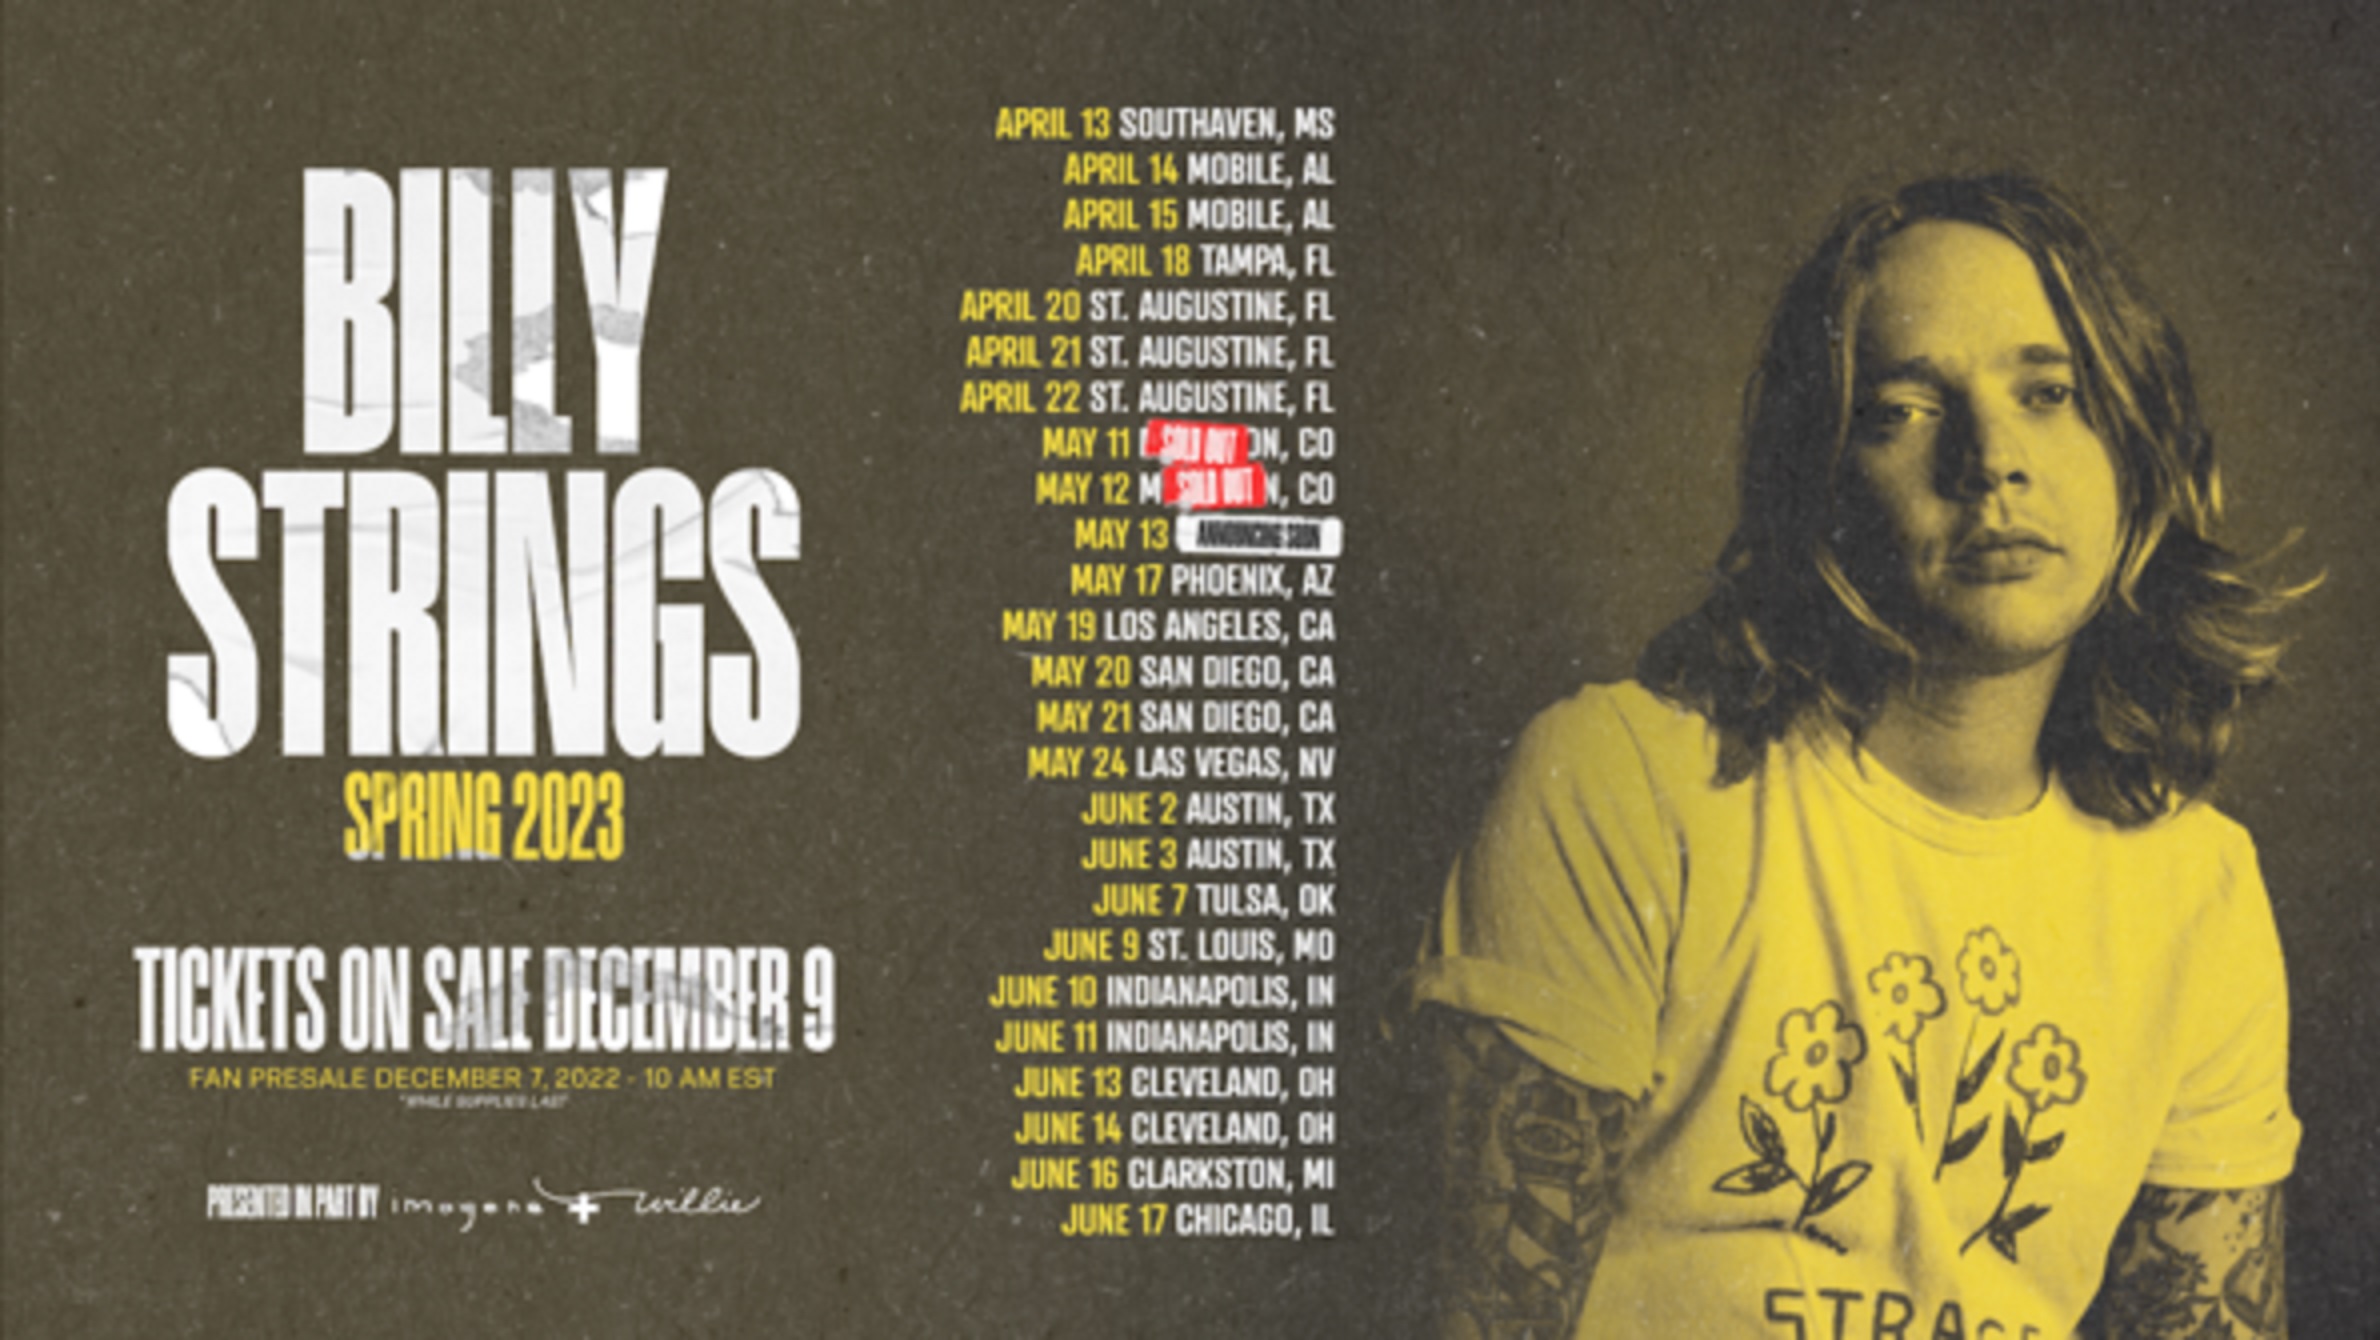 Billy Strings confirms 2023 spring tour including eight headline arena